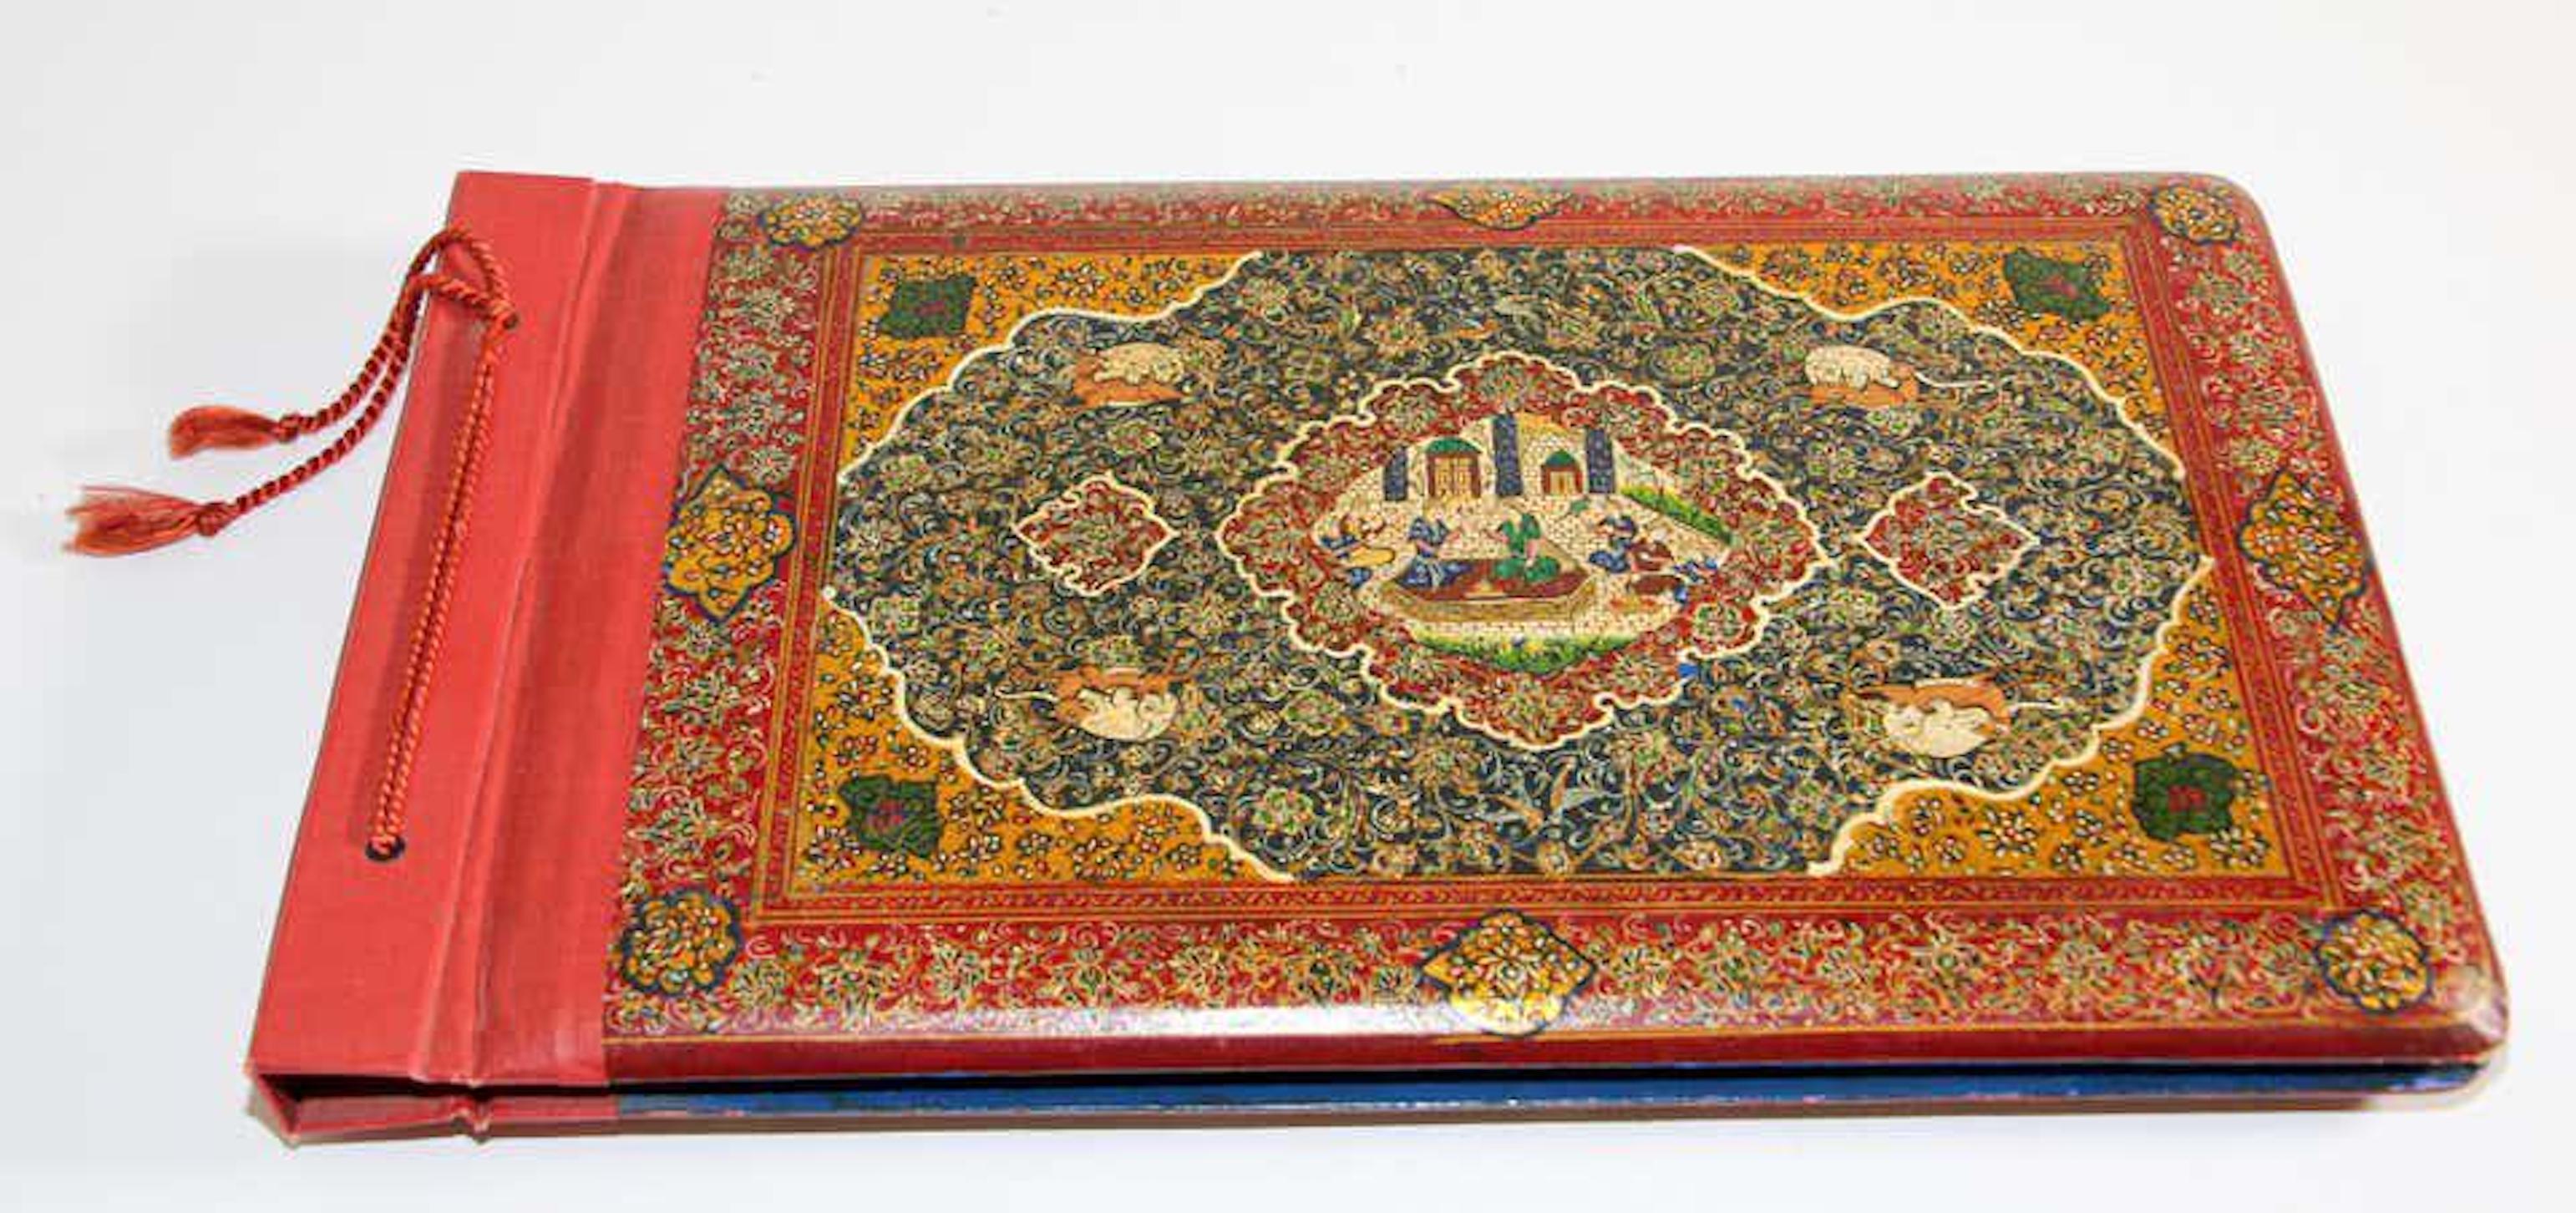 Hand Painted Middle Eastern Moorish Style Photo Album, 19th Century For Sale 10